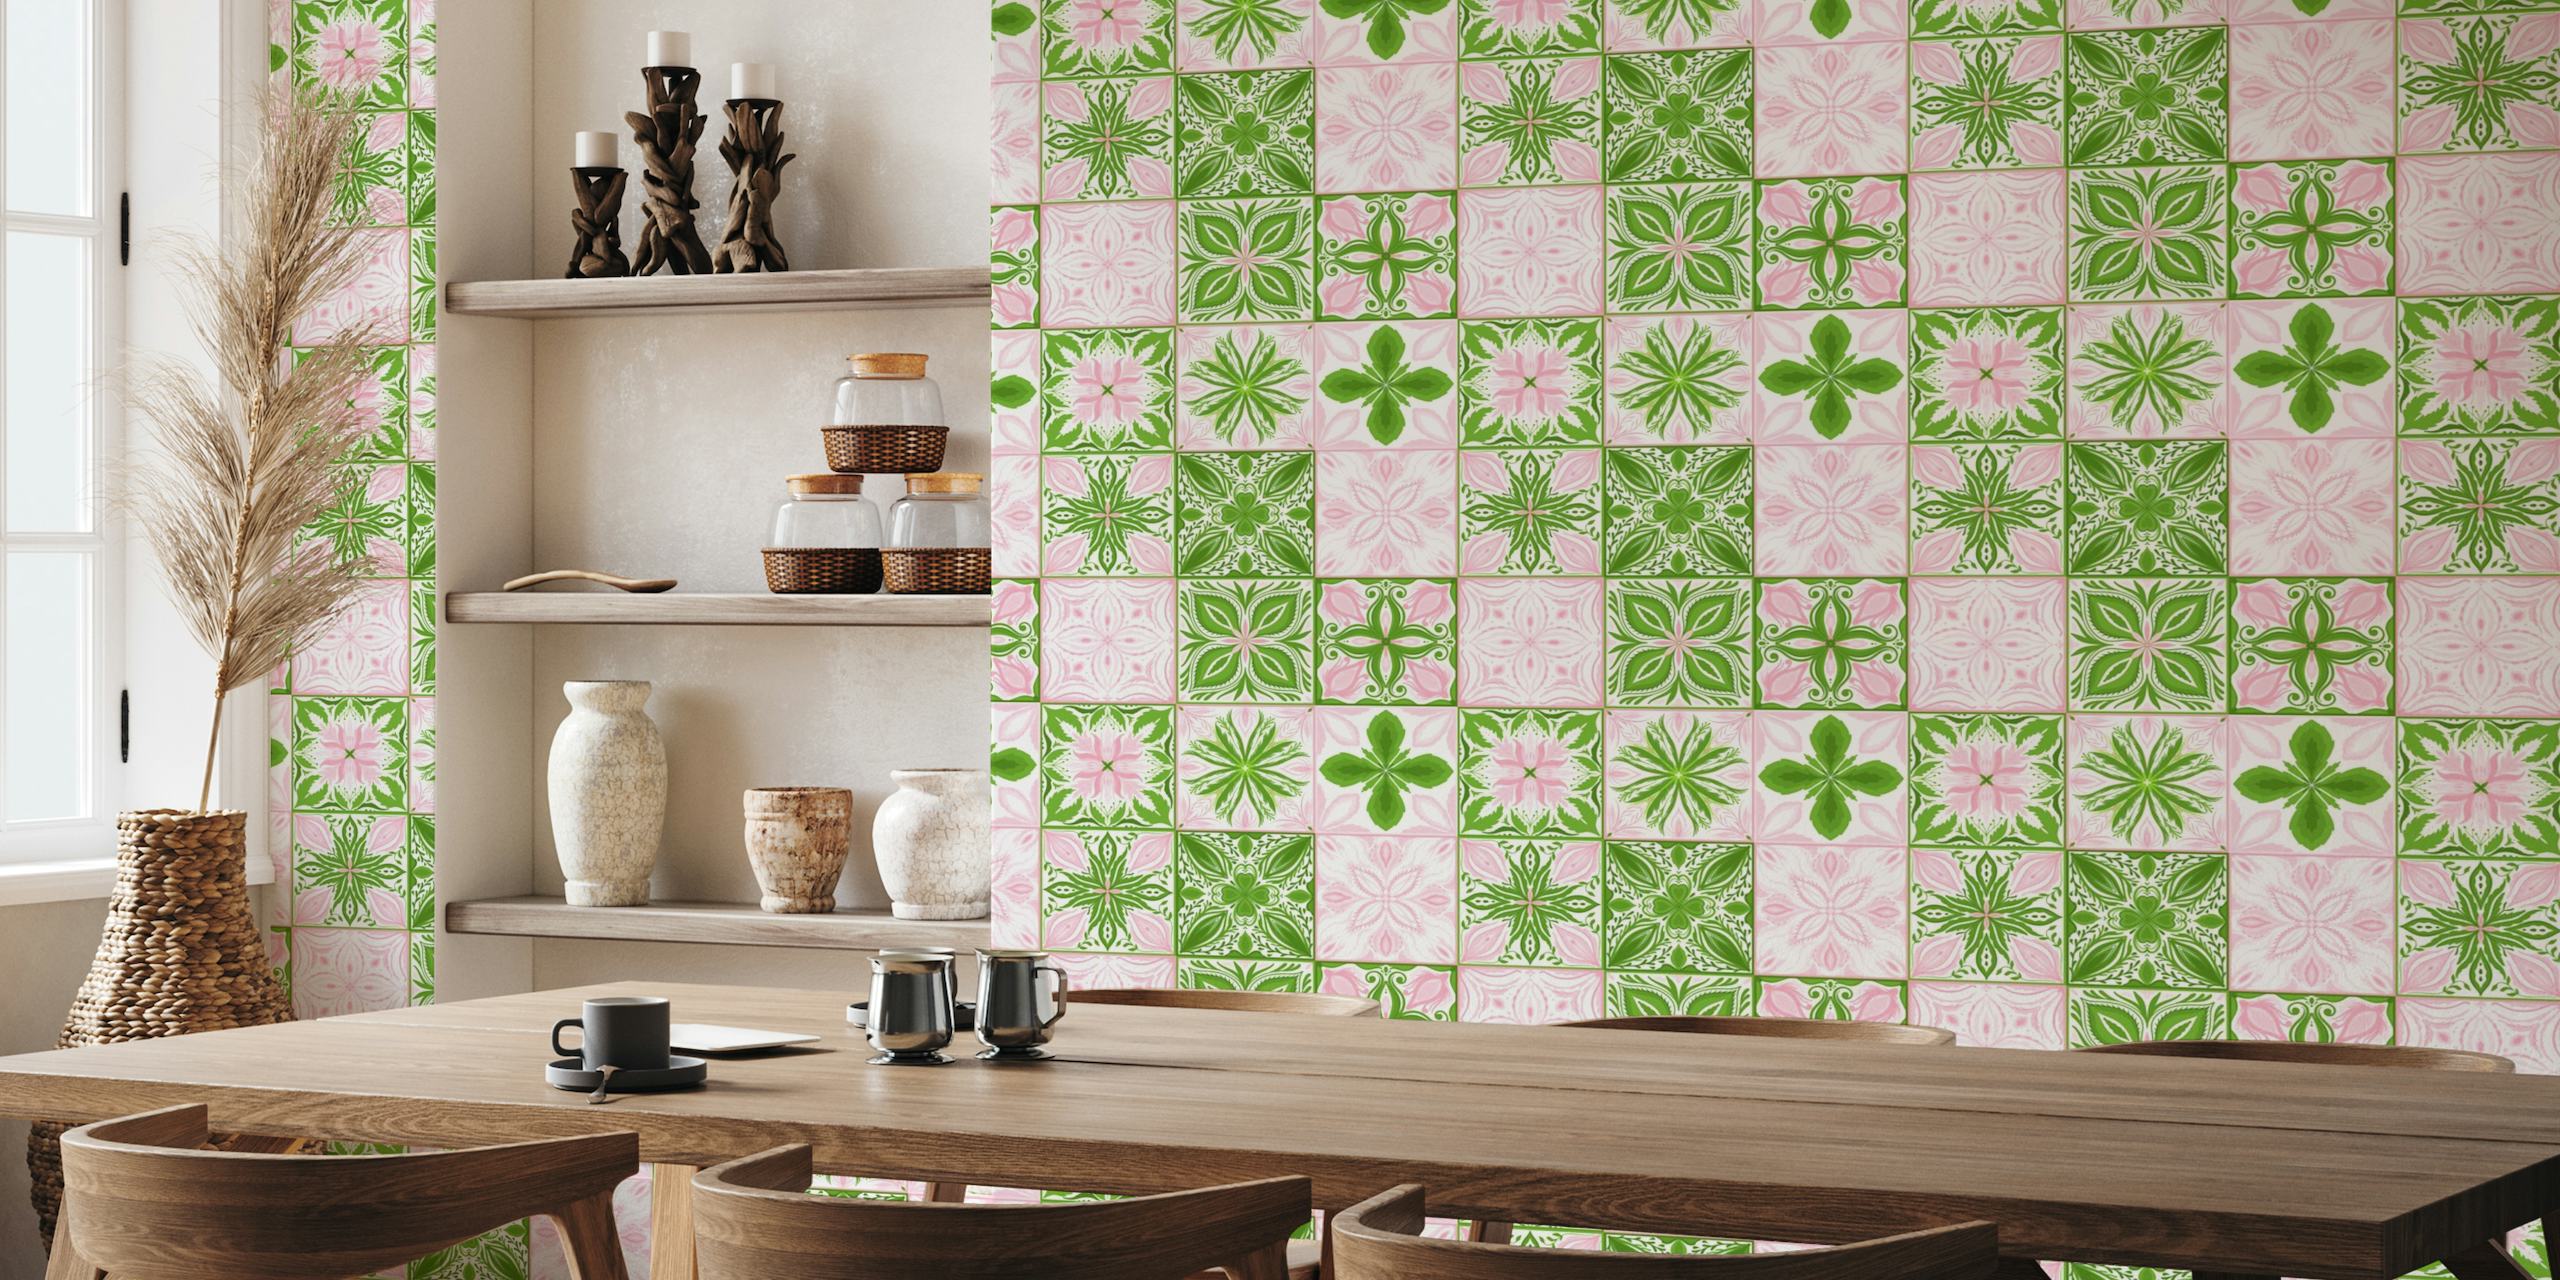 Ornate tiles in pink and green tapety